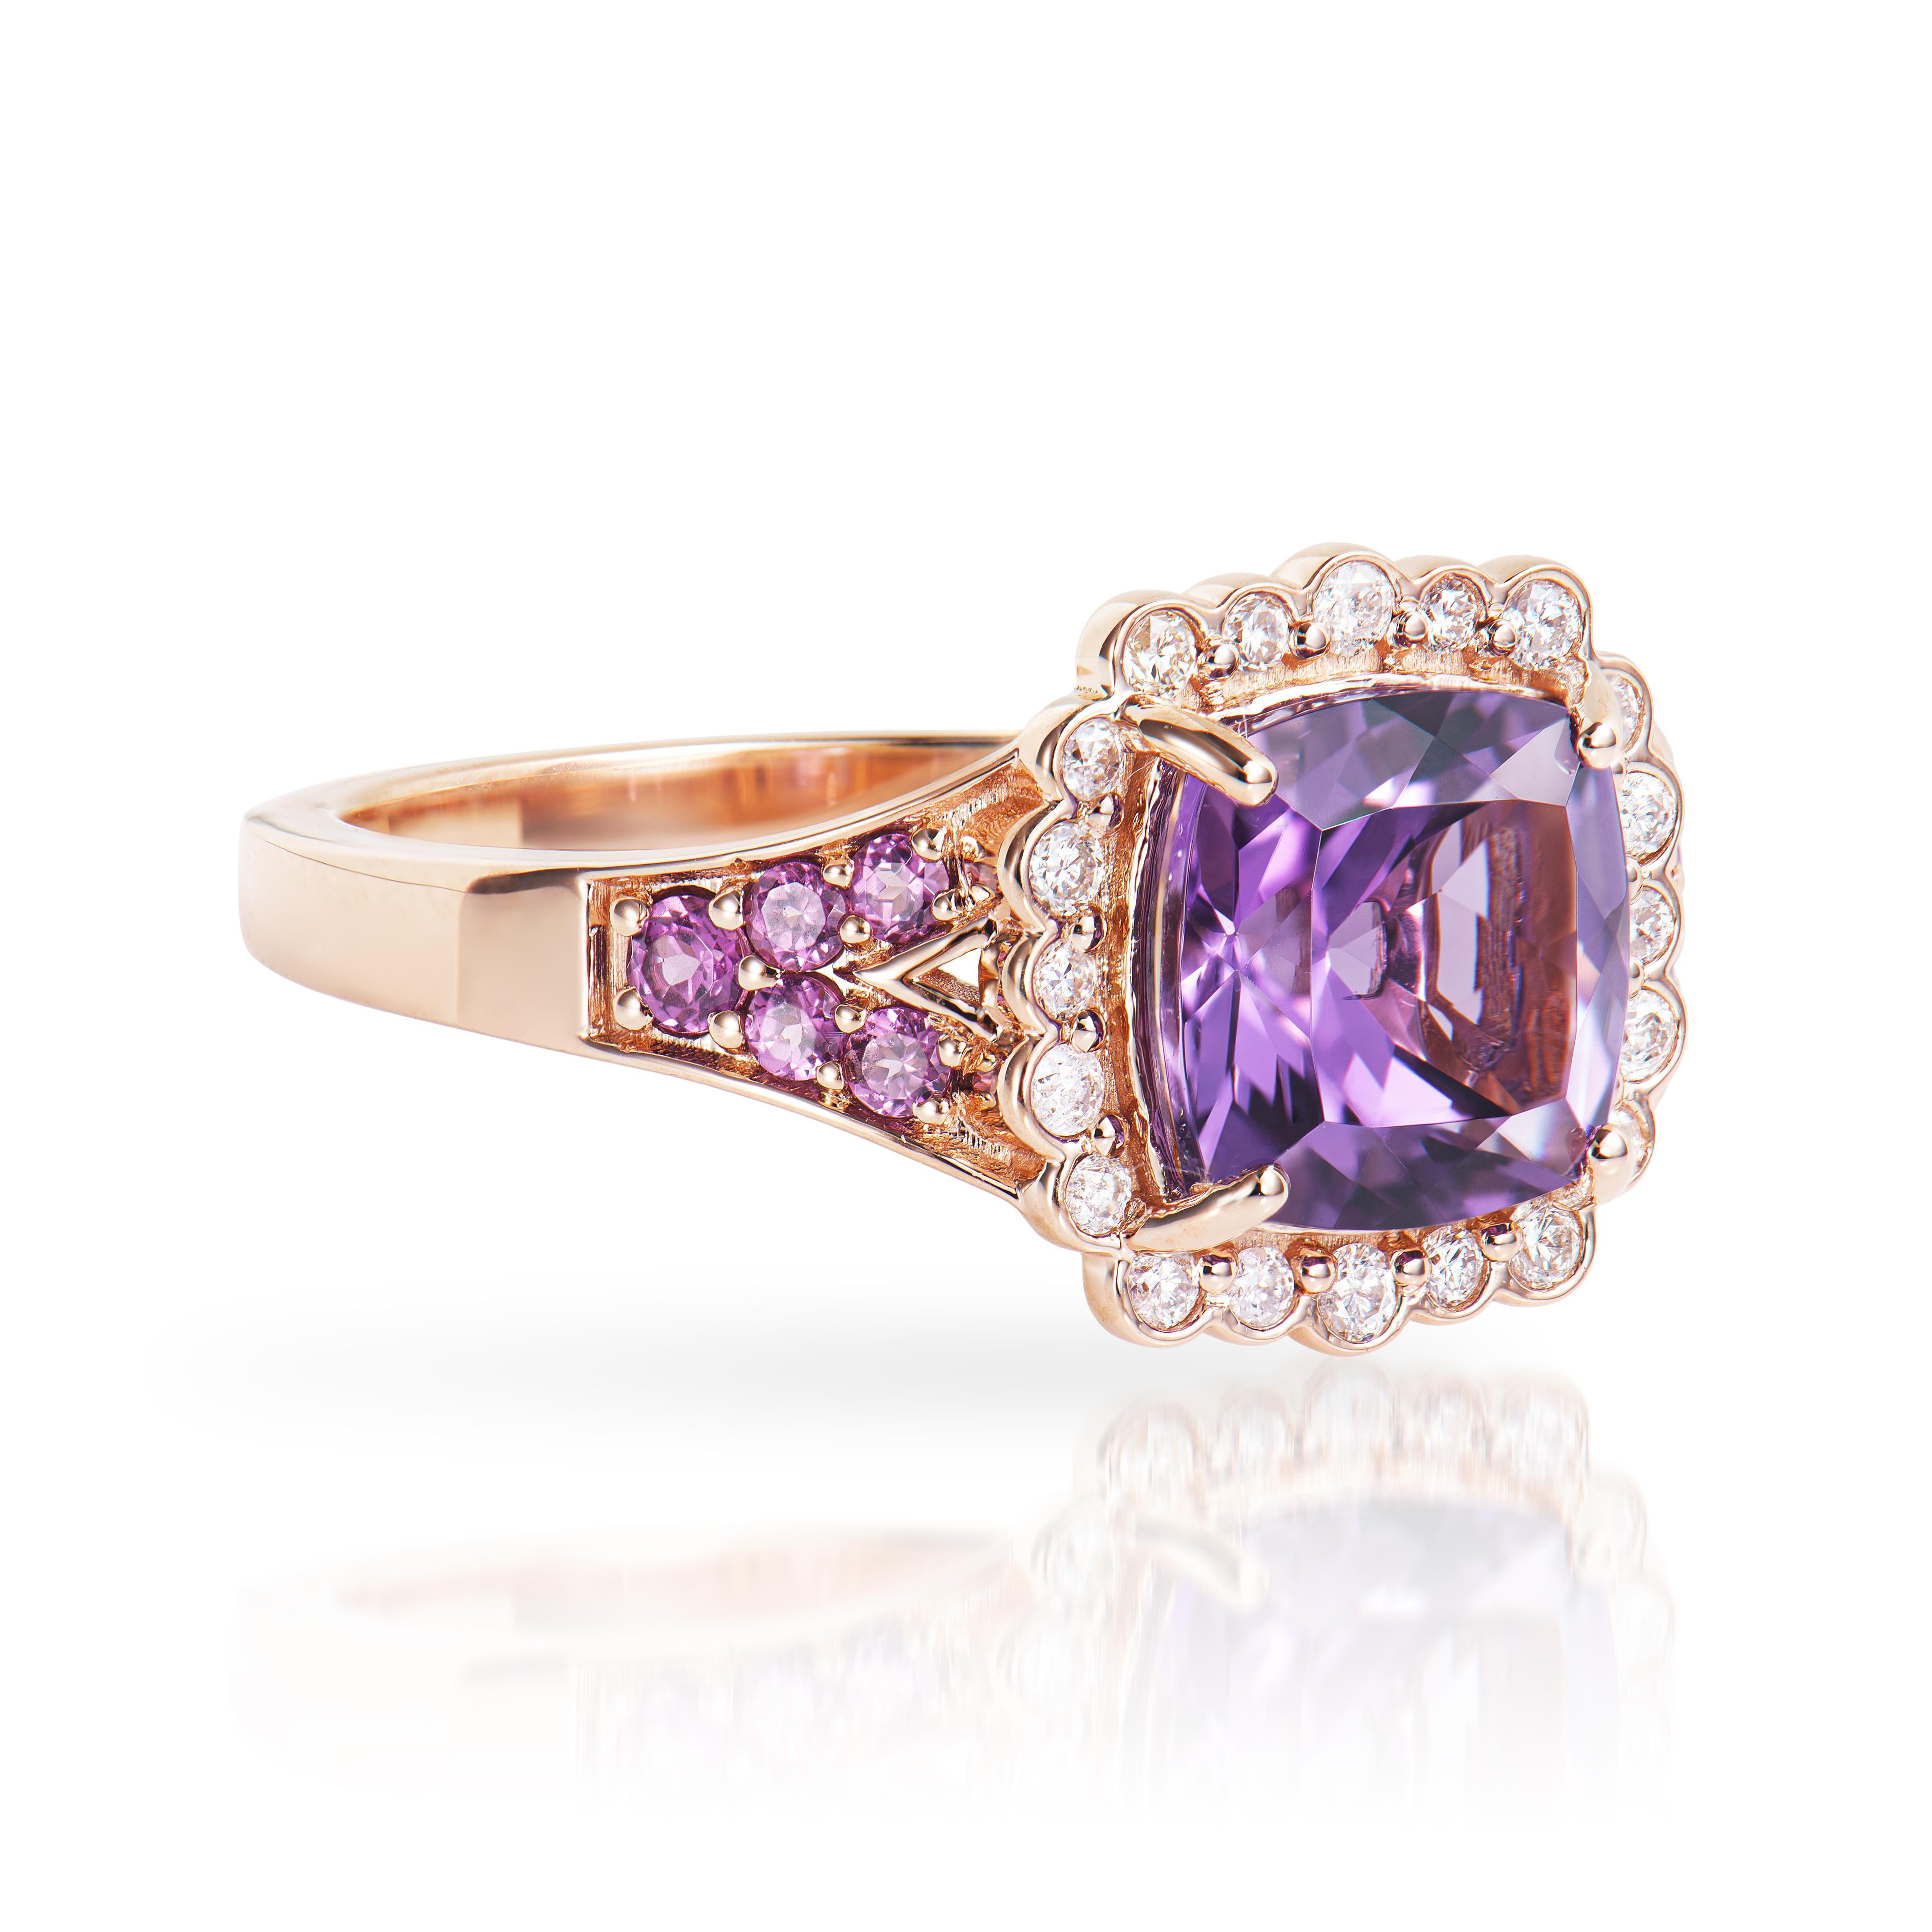 Presented A stunning variety of amethyst gemstones for those who respect quality and wish to wear them on any occasion or everyday basis. The rose gold amethyst fancy ring, embellished with rhodolite and diamonds, has a timeless and exquisite